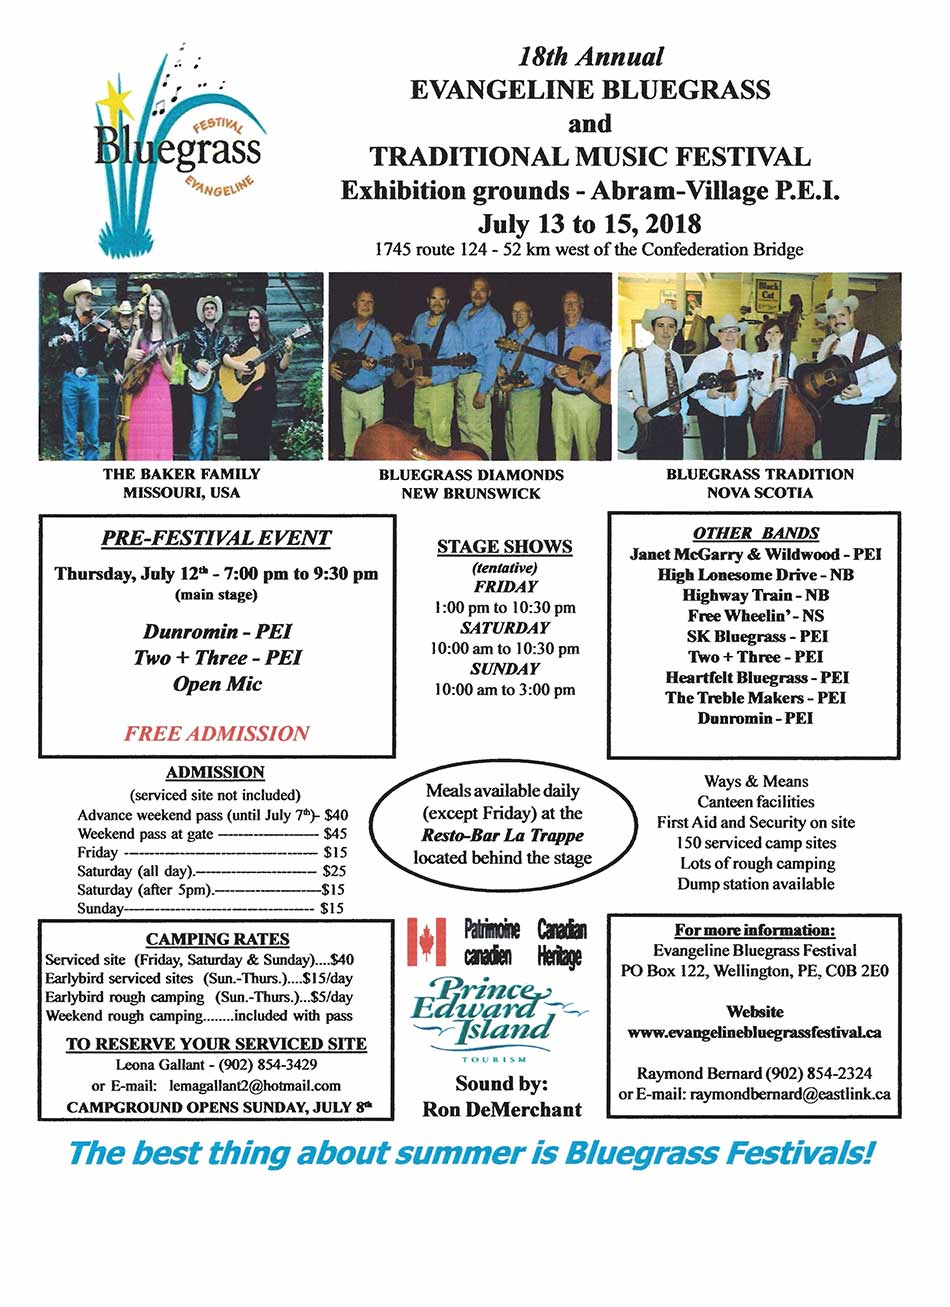 Evangeline Bluegrass and Traditional Music Festival Flyer